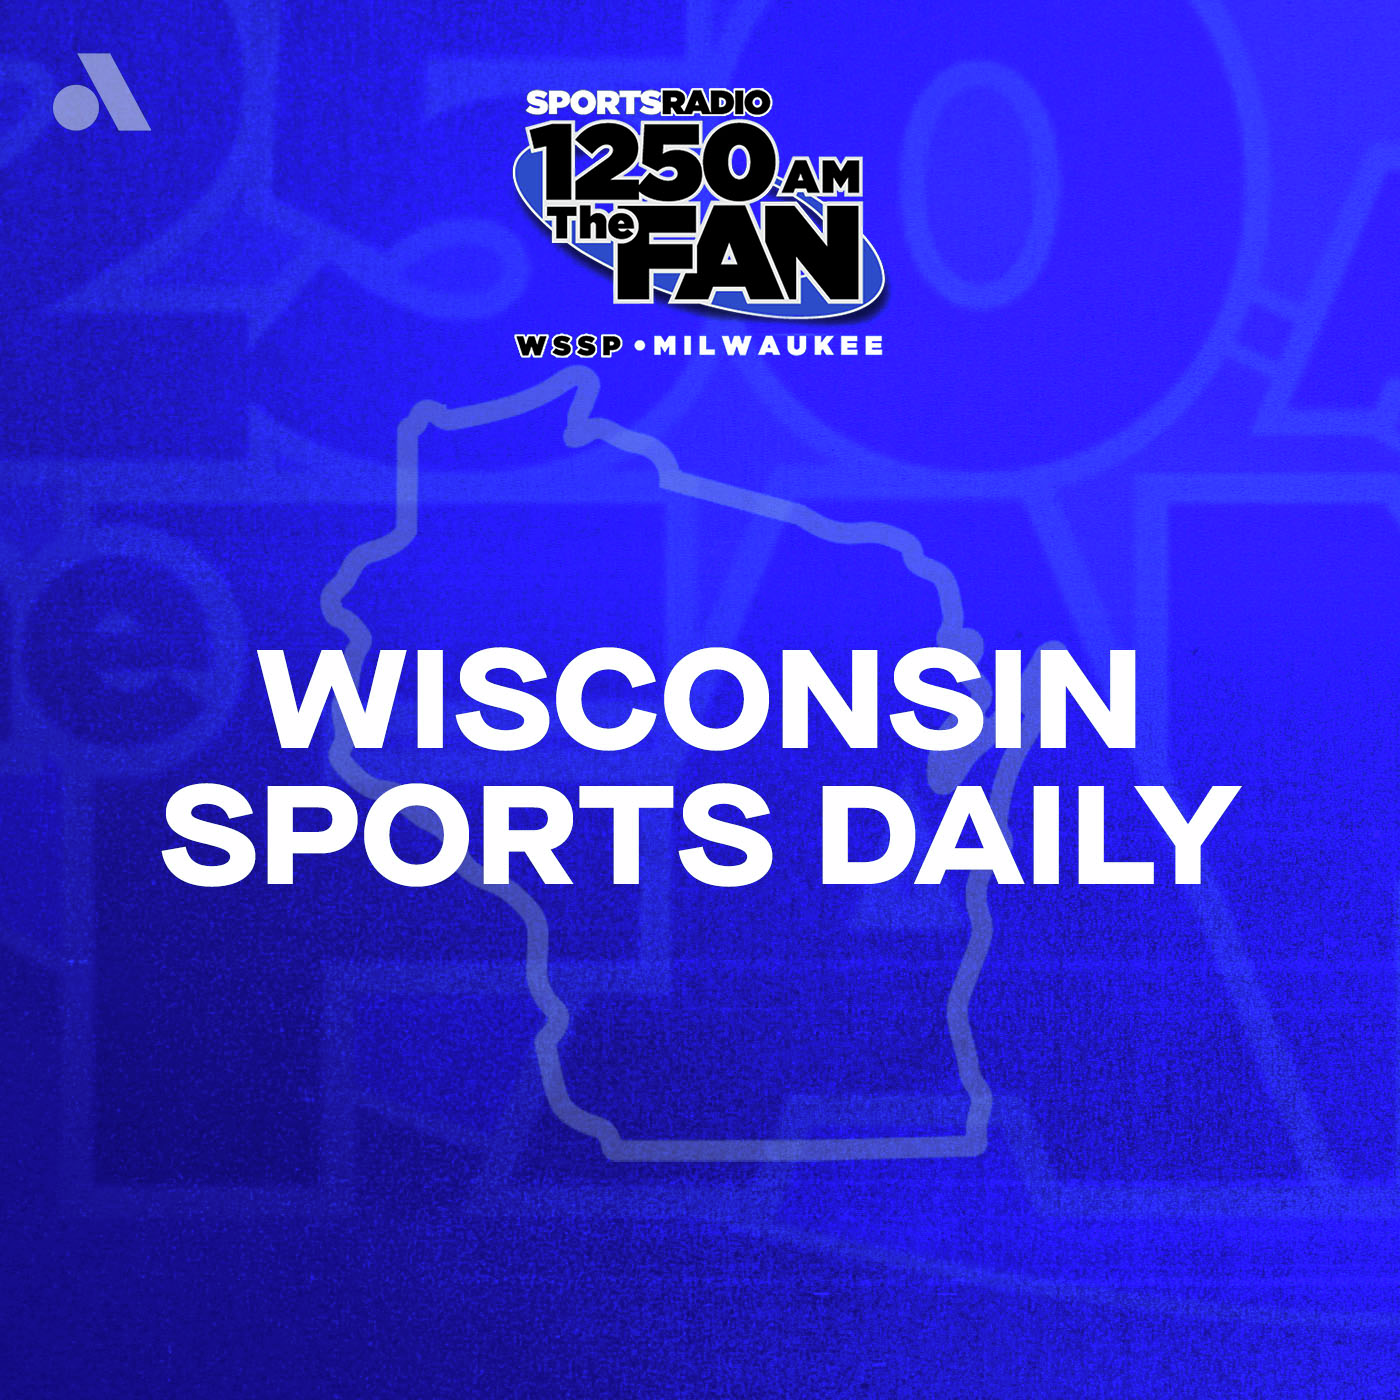 Tuesday, July 2nd: Jake Kocorowski of Badger Extra Joins Wisconsin Sports Daily